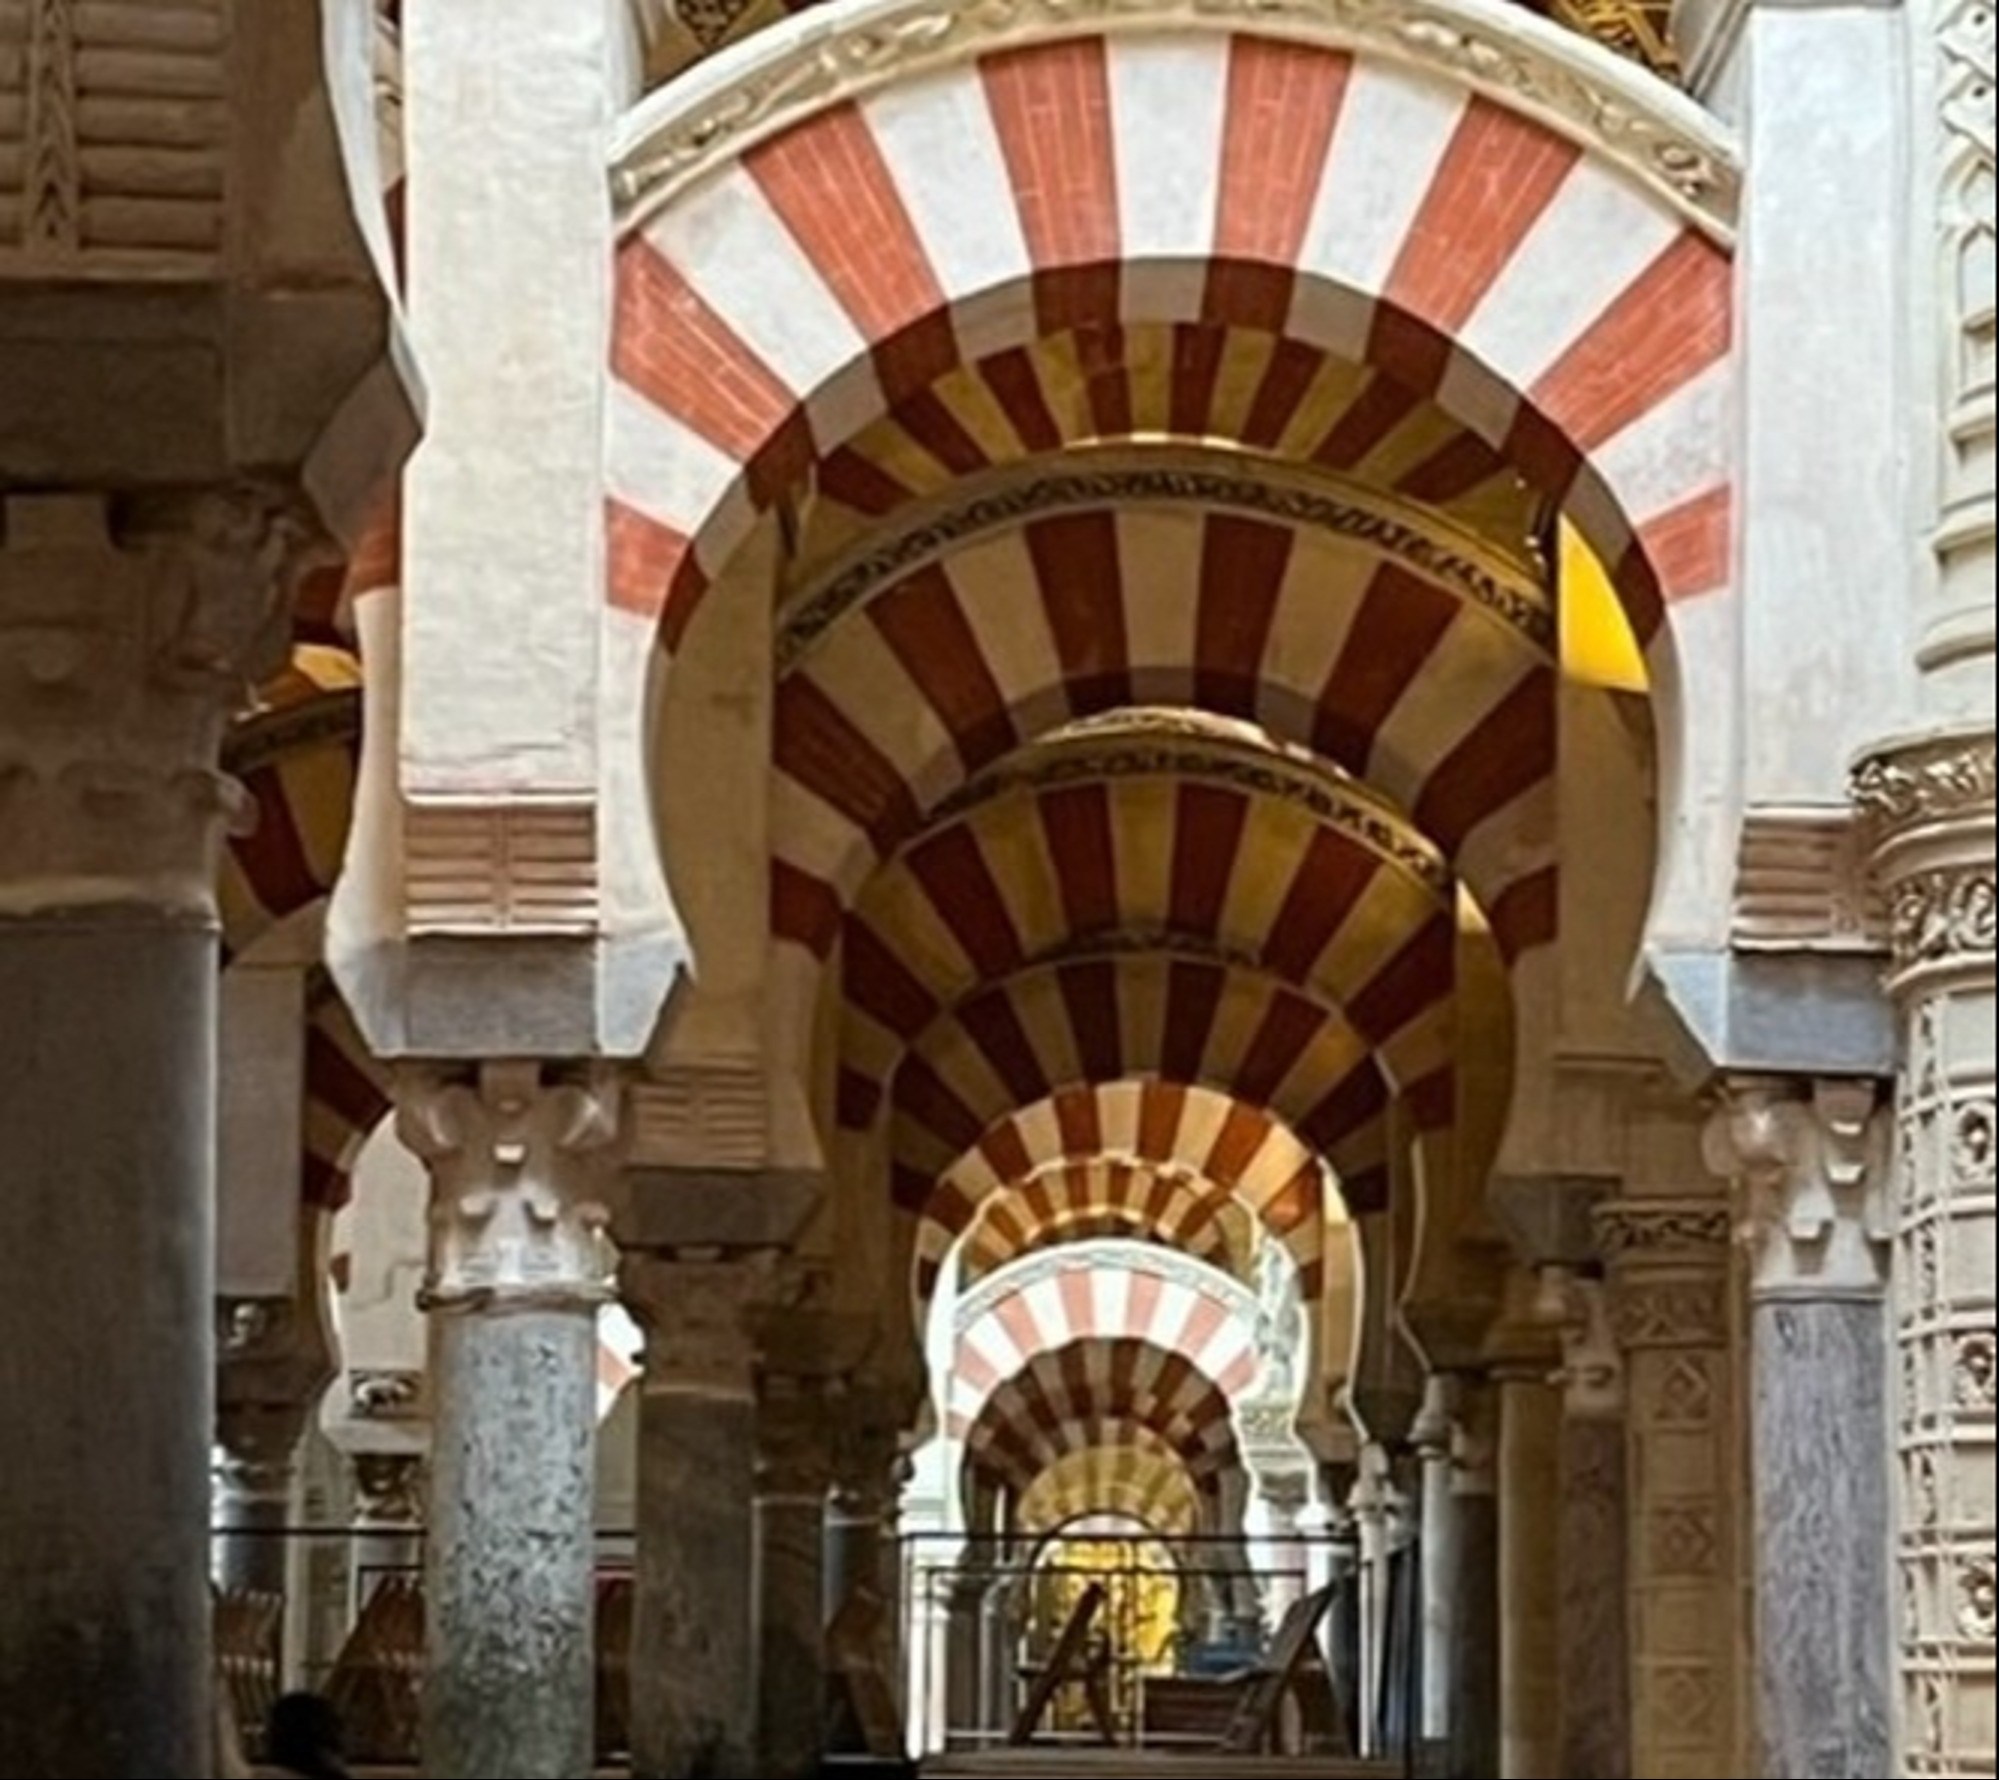 Arches in Islamic, later Catholic, cathedral in Cordoba from Sandy's trip ©Sandy Green